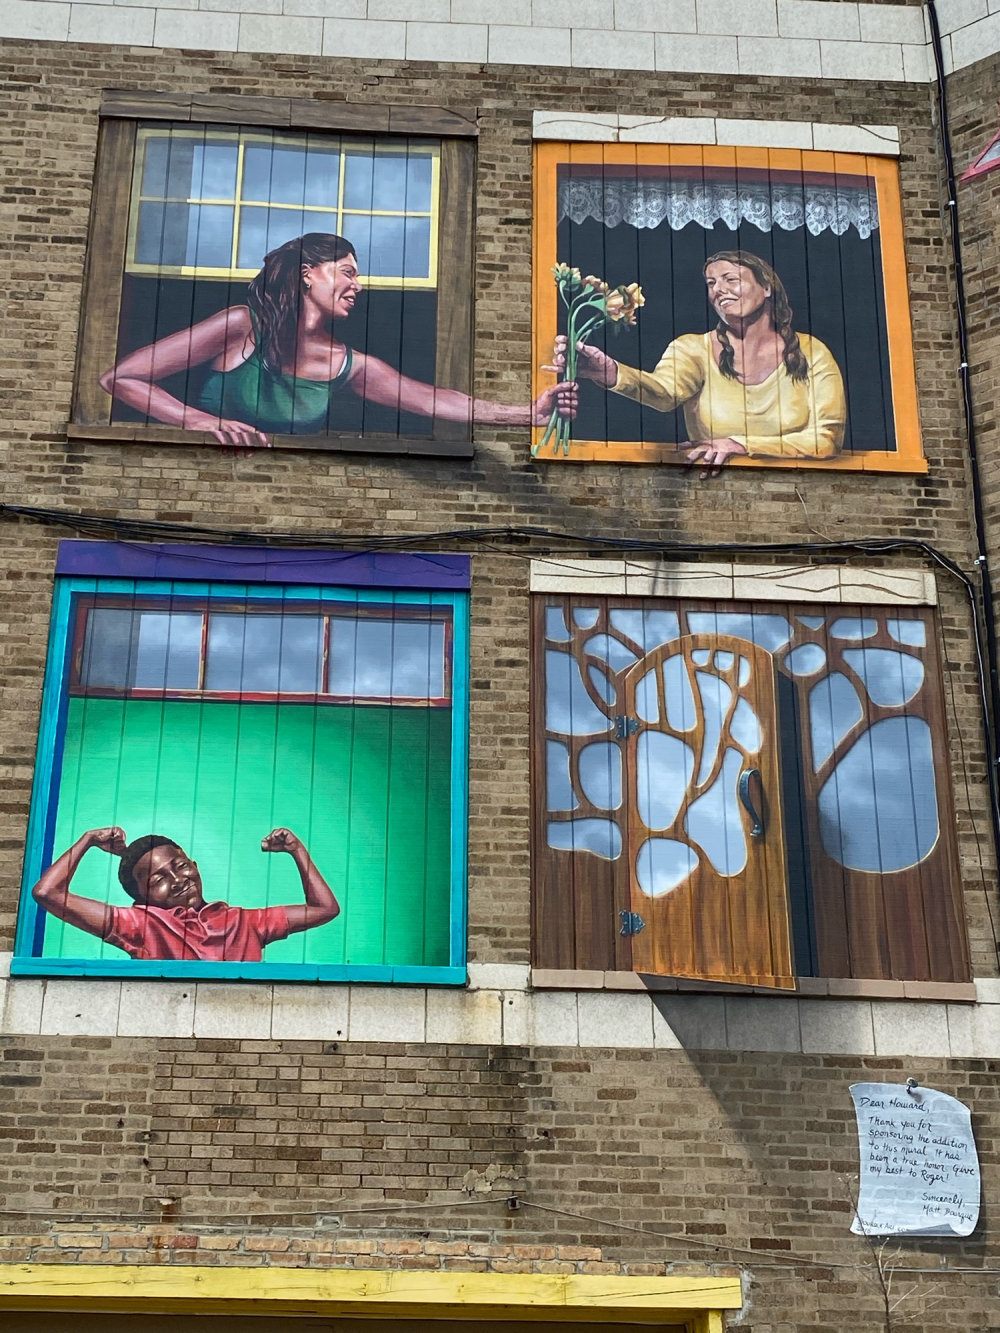 mural in Chicago by artist unknown.